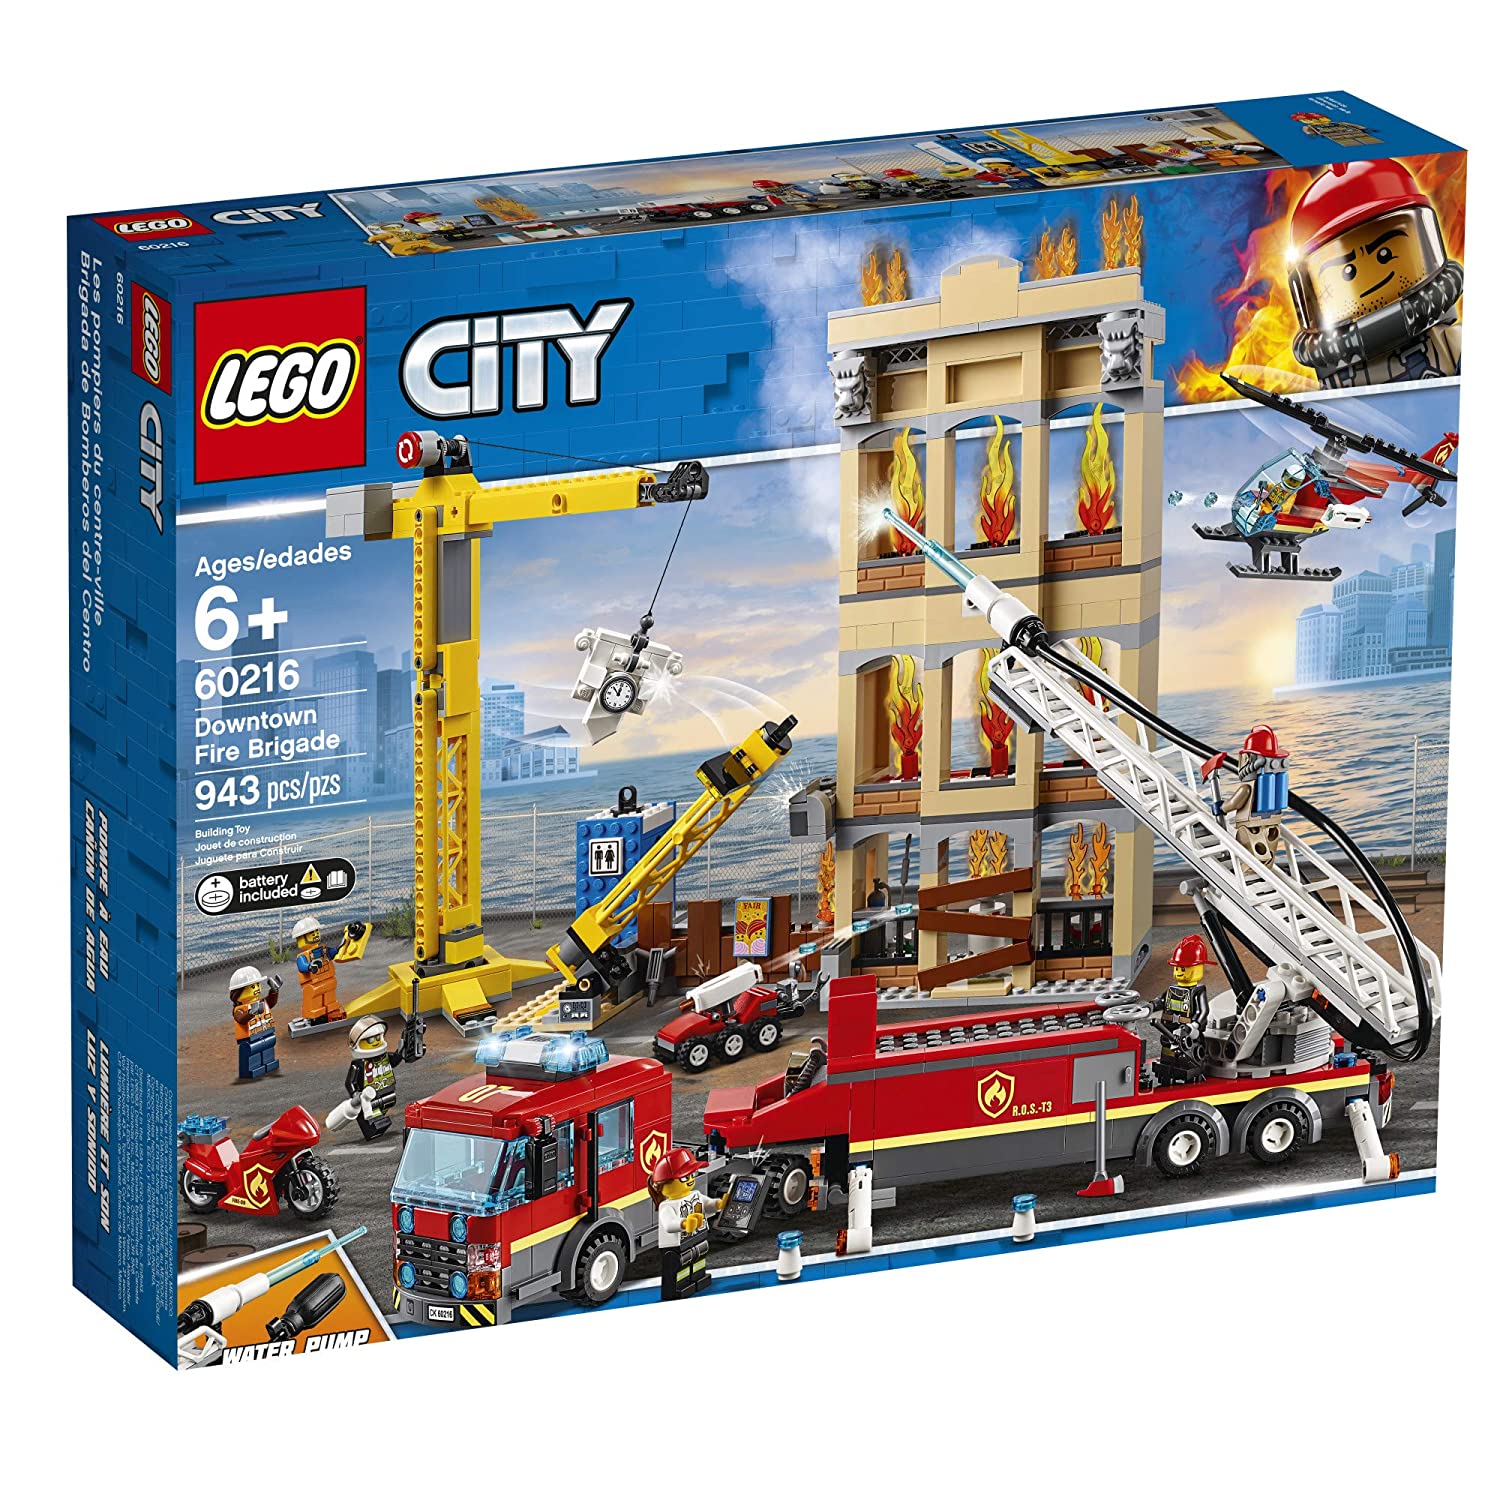 9 Best LEGO Fire Station Sets 2022 - Buying Guide 2